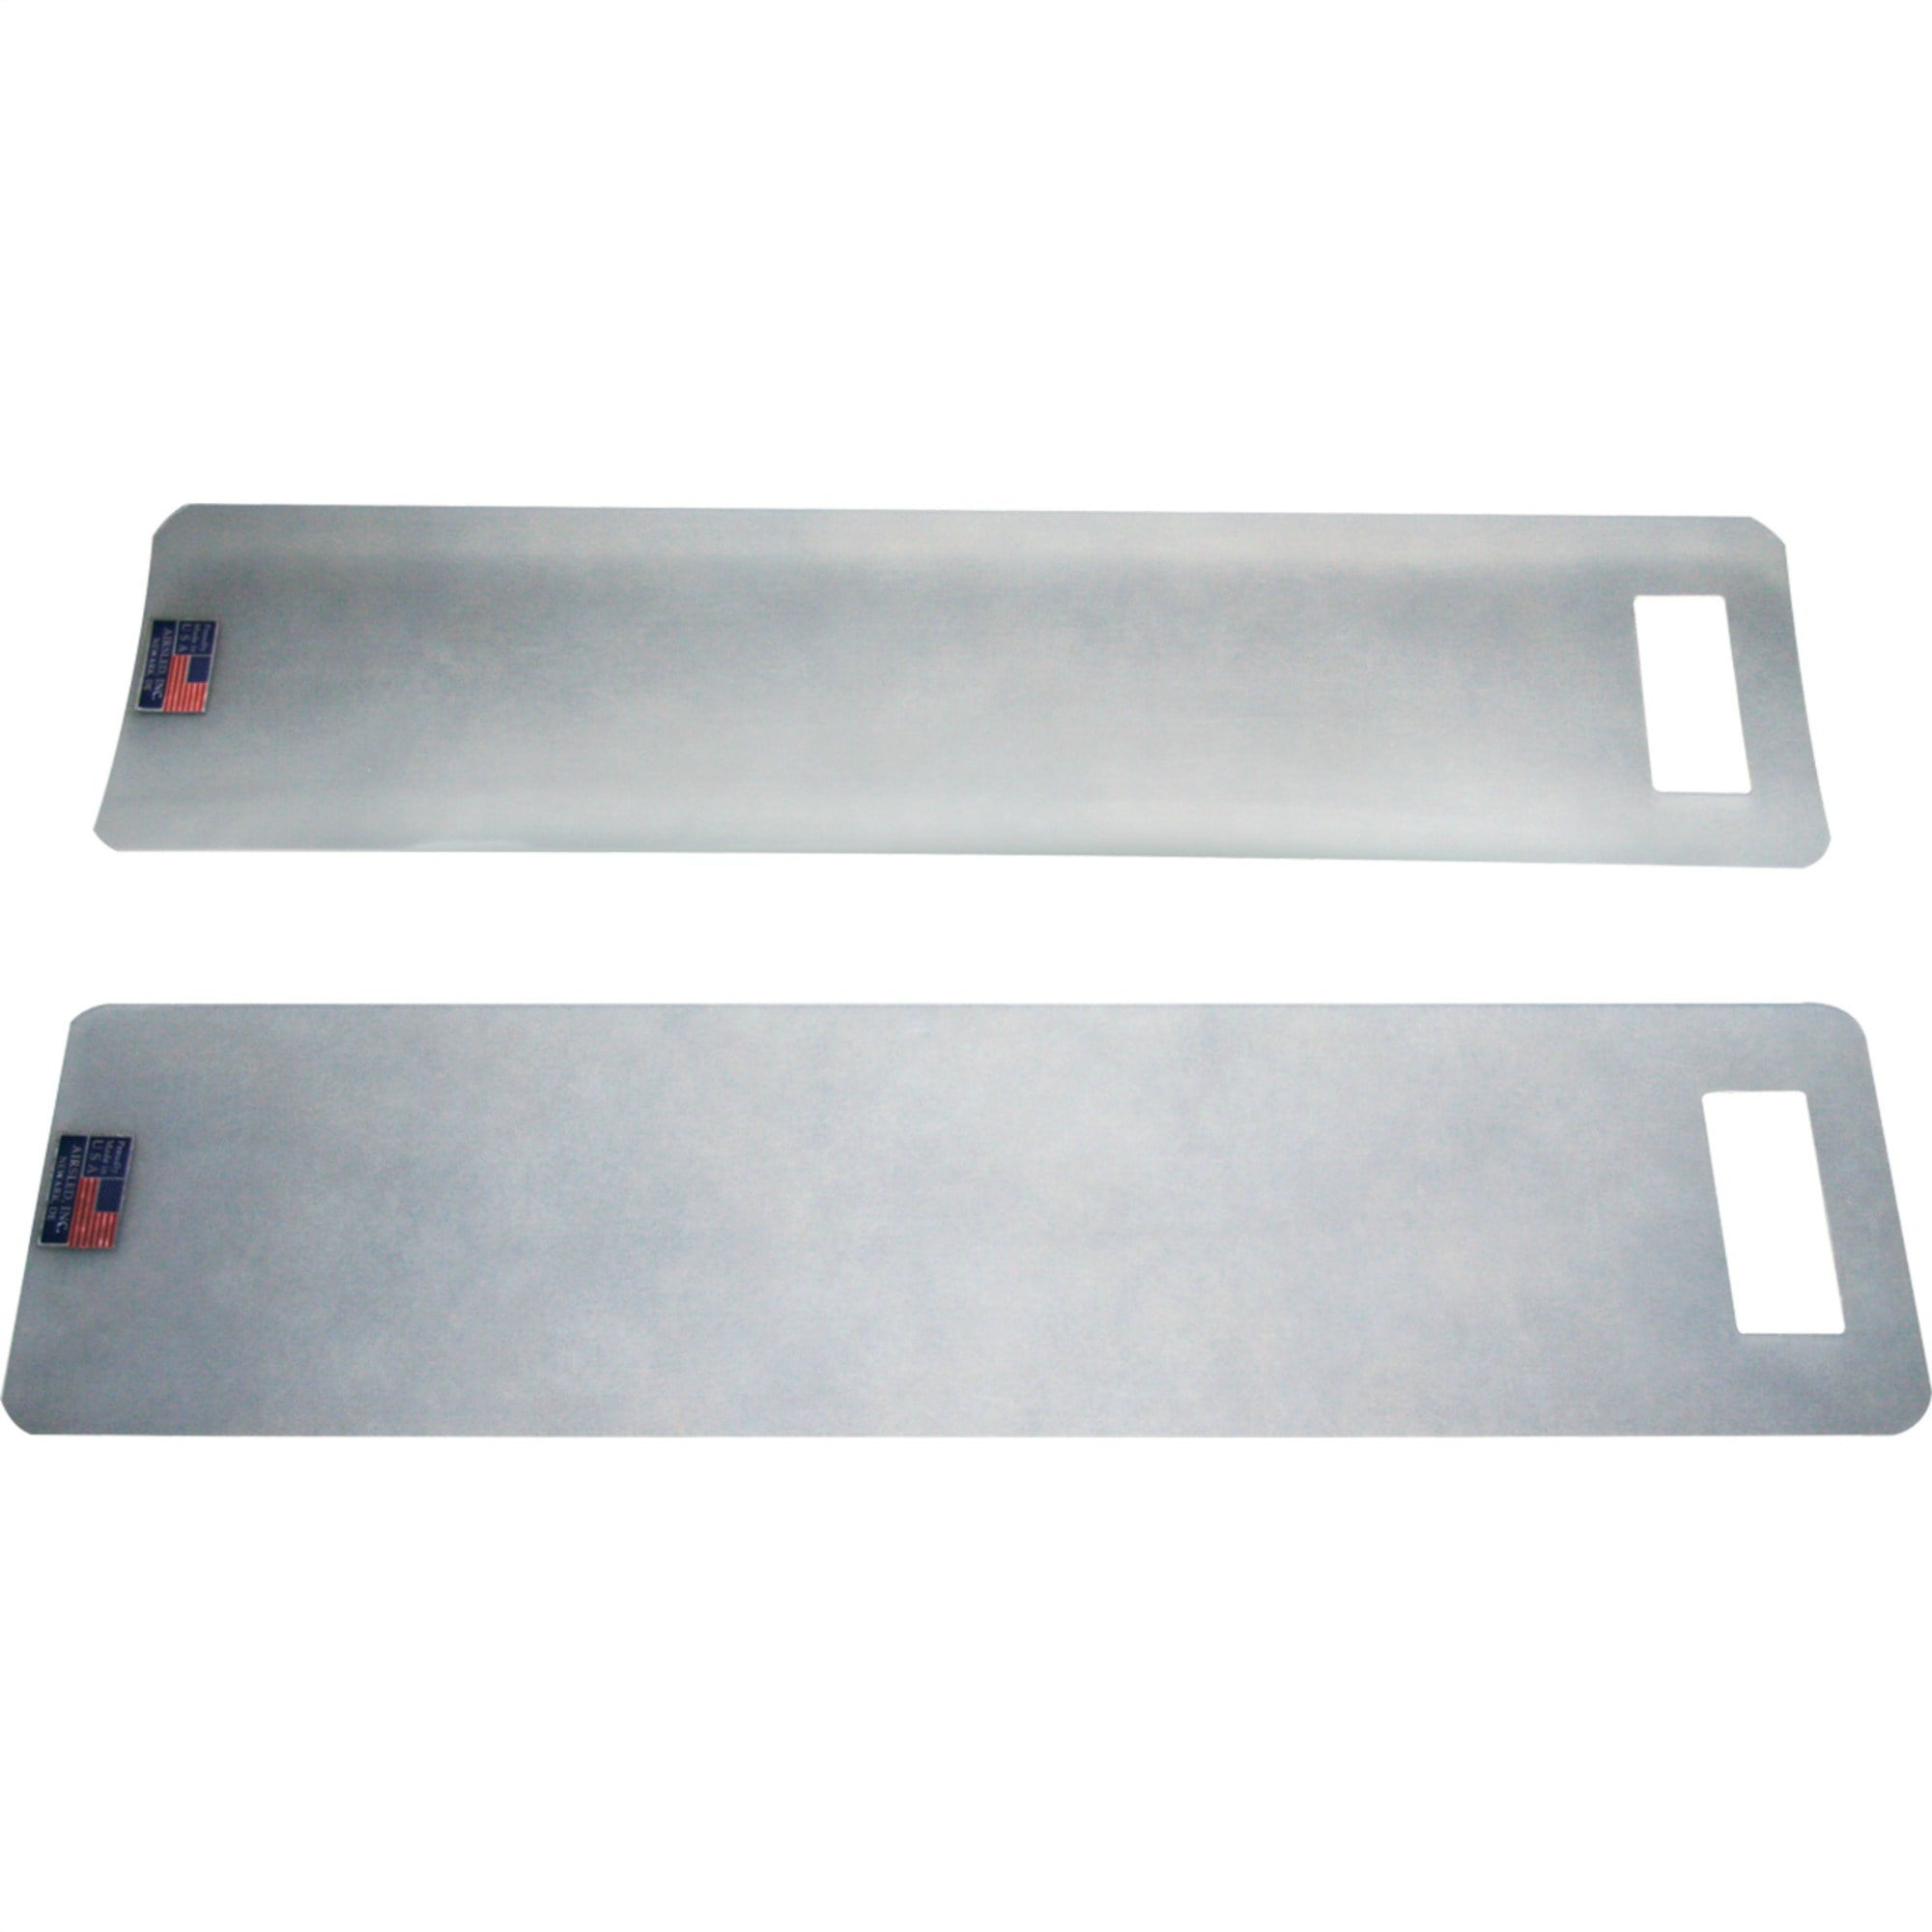 WX05X12009 by GE Appliances - Appliance Slides 2 Pack